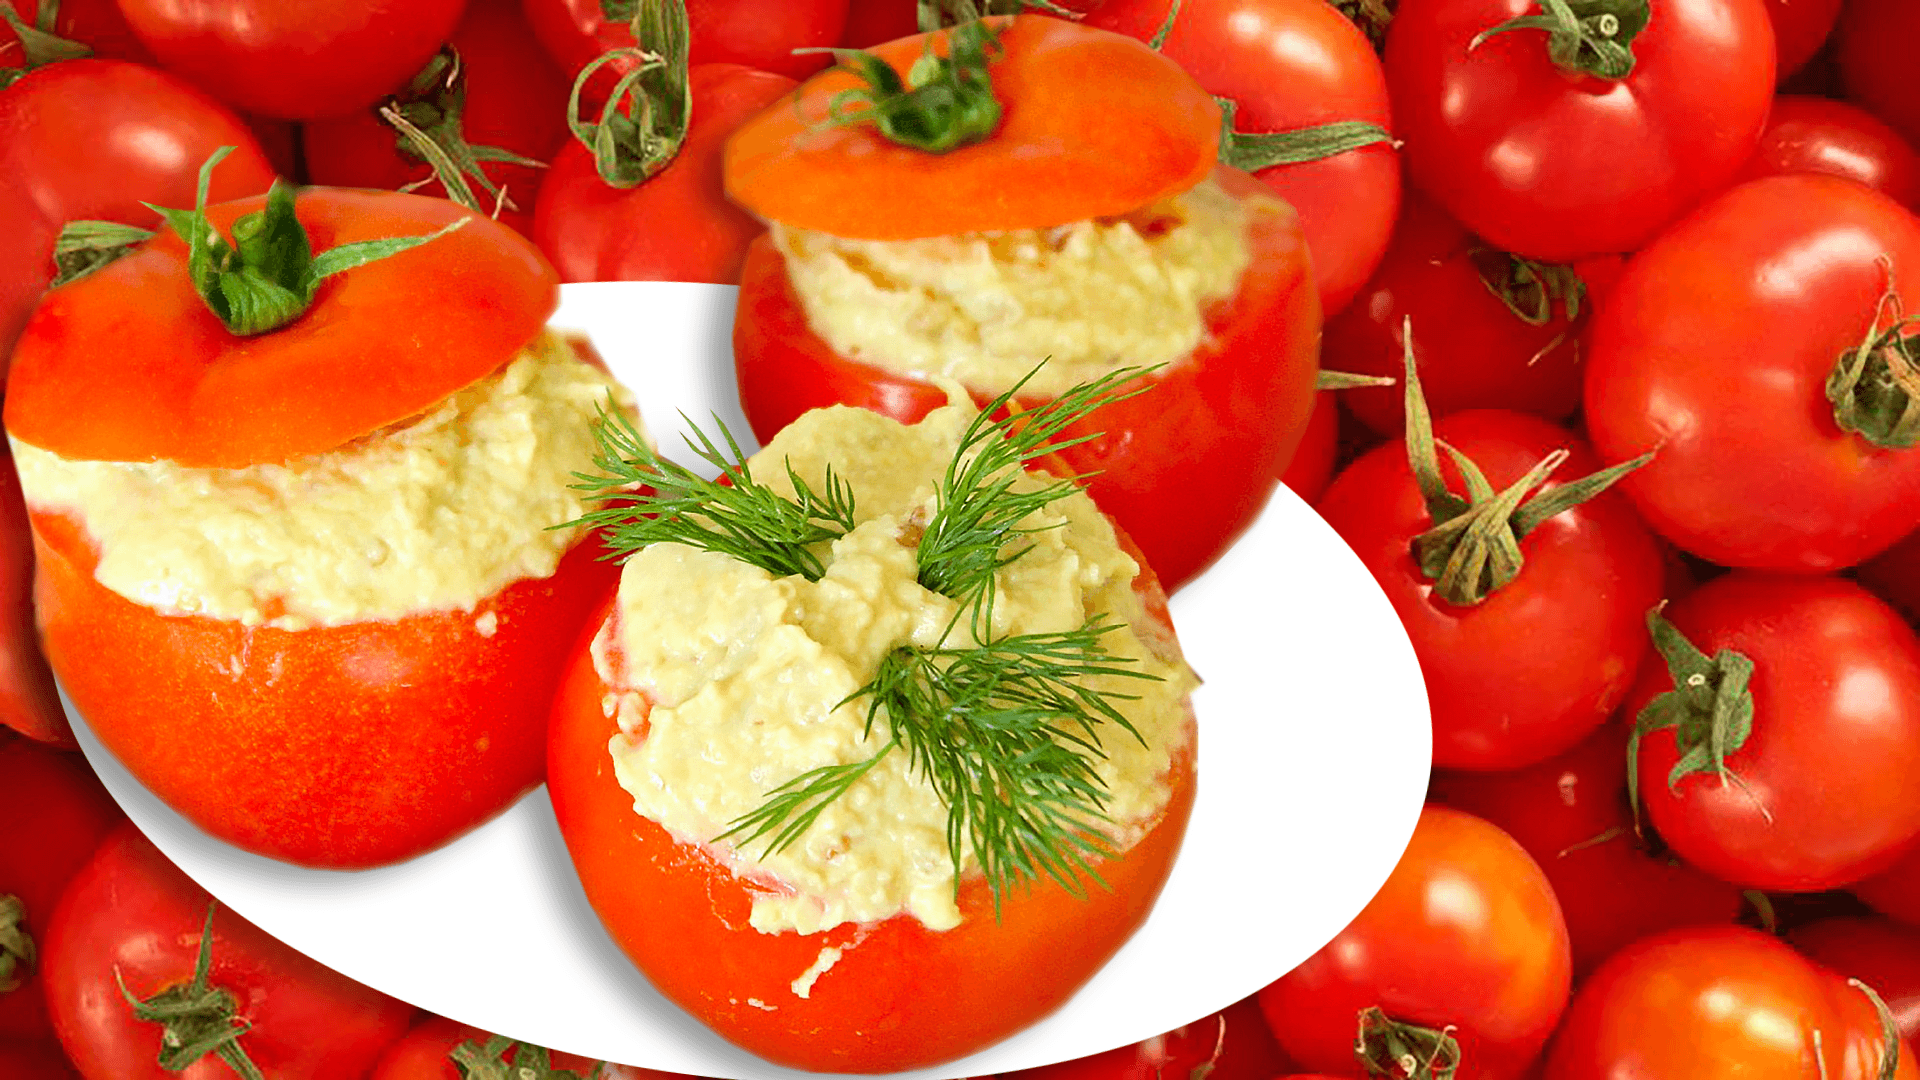 Cold Stuffed Tomatoes (Eggplant Salad Appetizer)